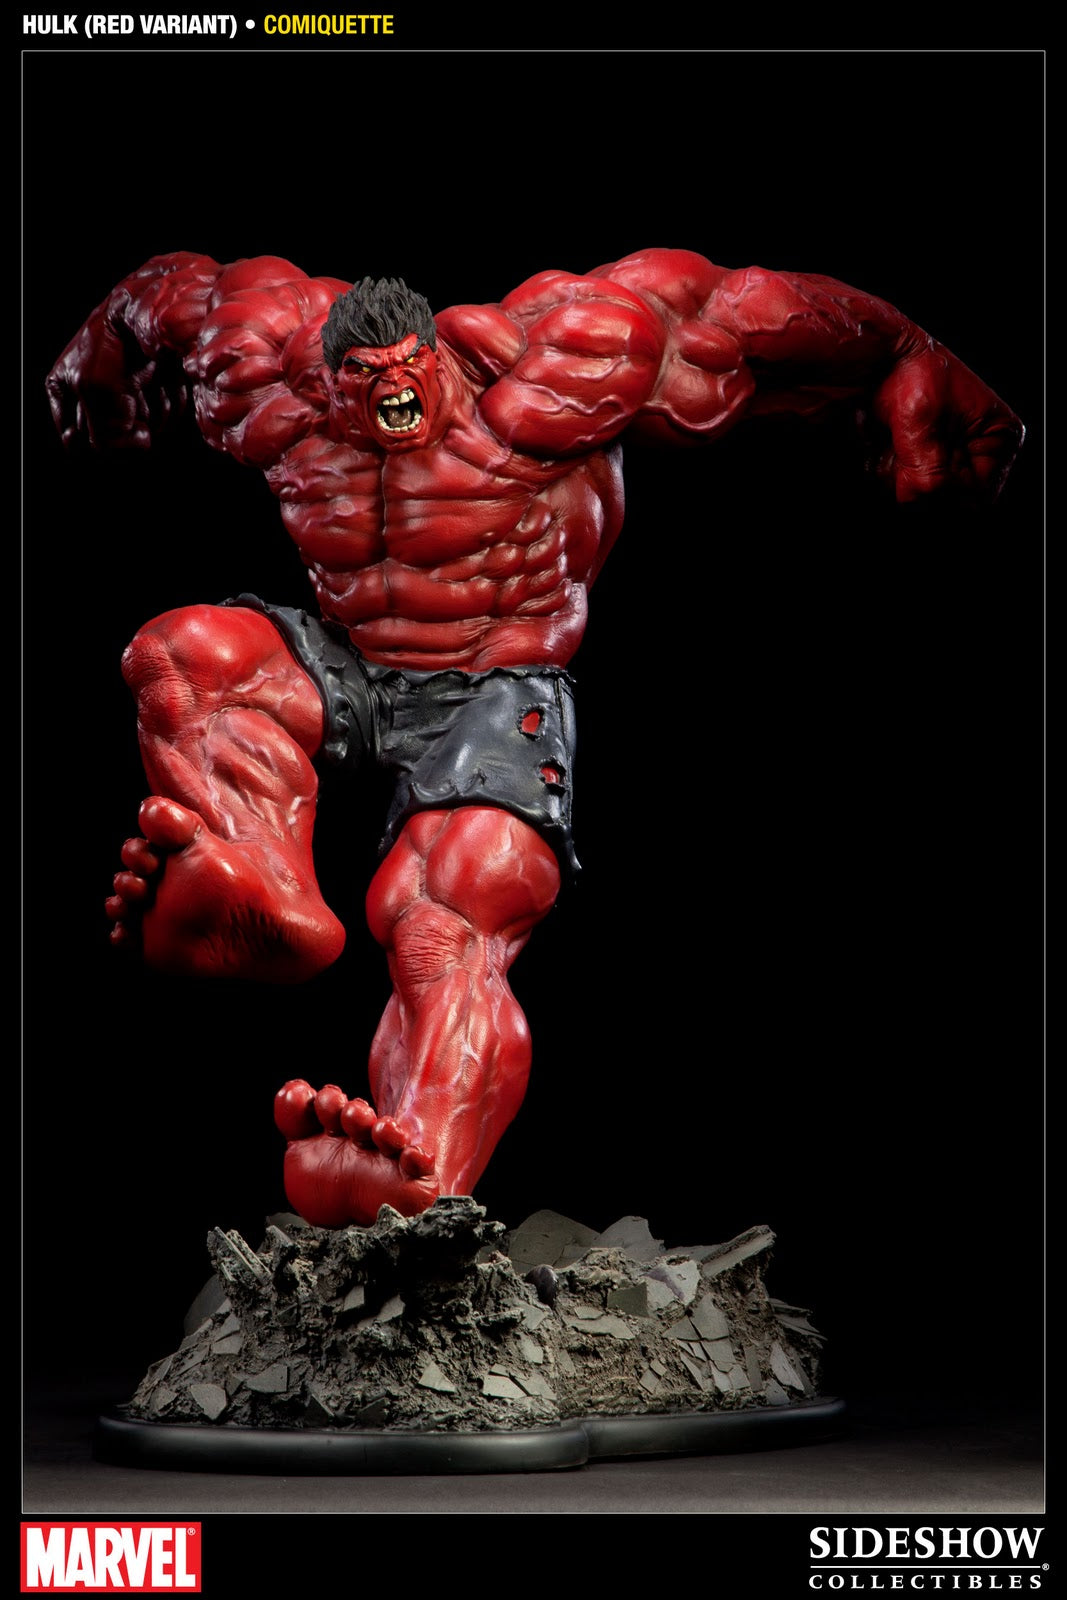 RED HULK Polystone Statue by Sideshow Collectibles